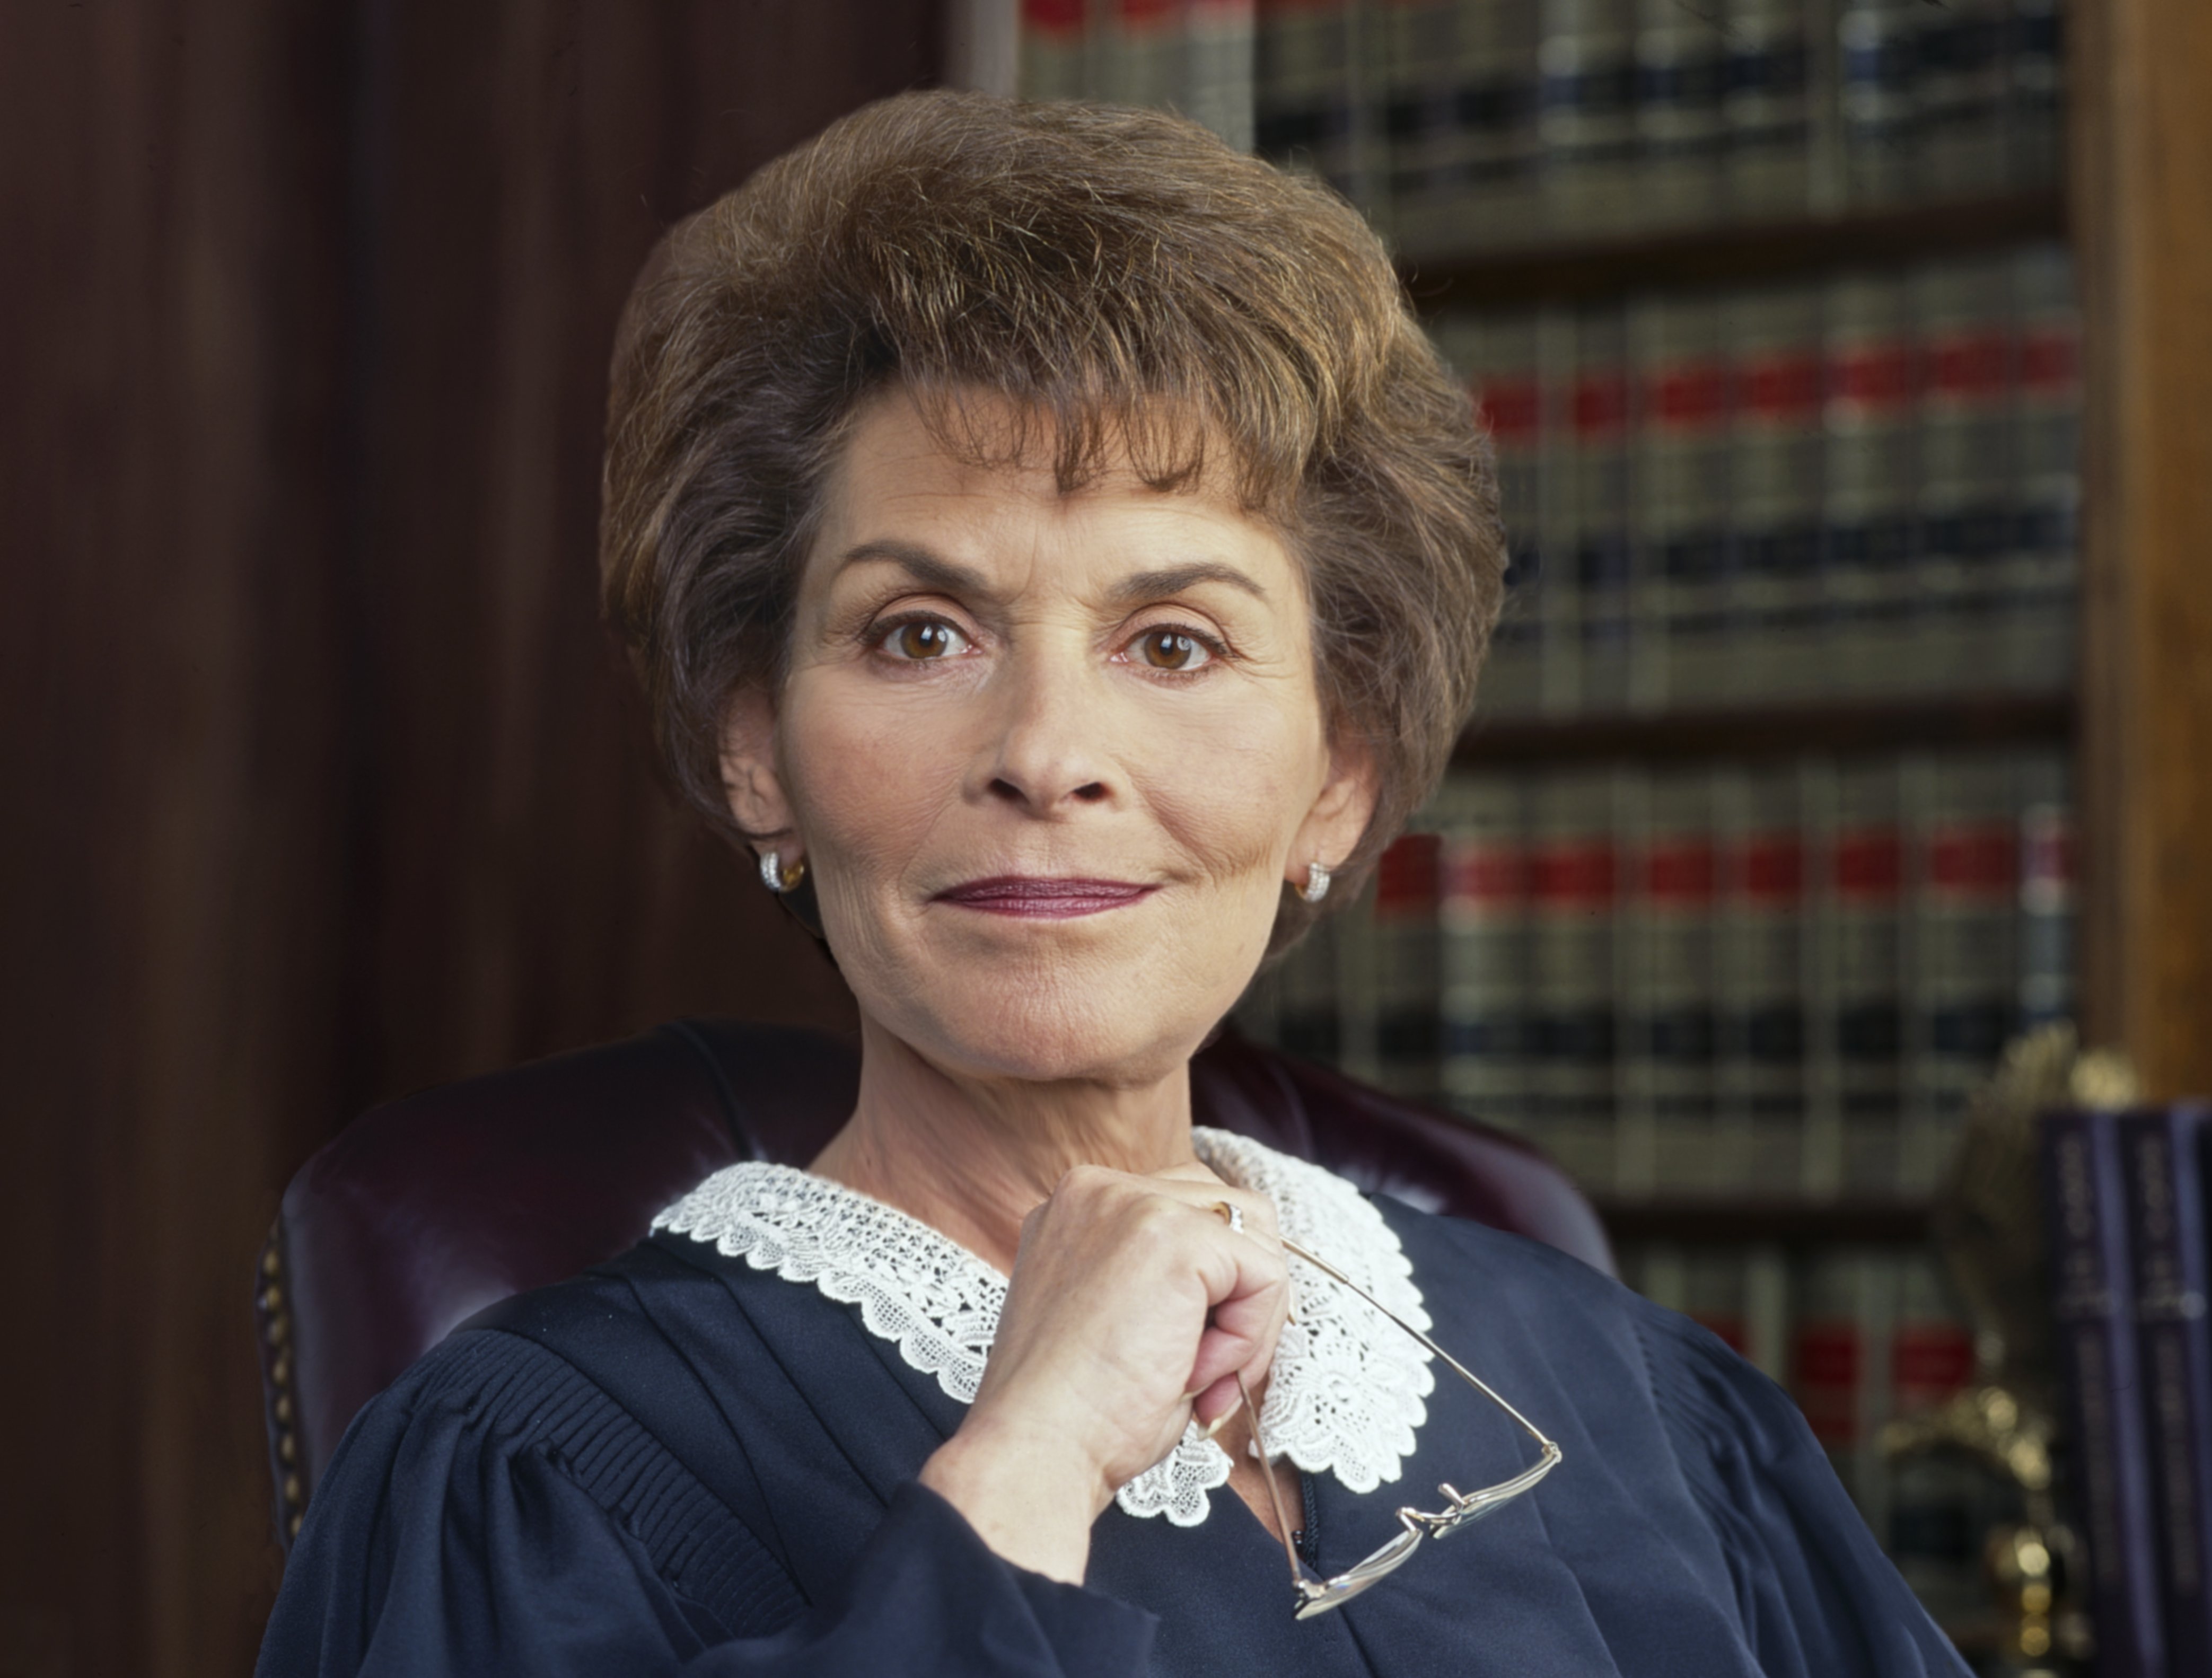 Cultural icon Judge Judy Sheindlin poses for a photo in December 1996 in Los Angeles, California | Photo: Getty Images